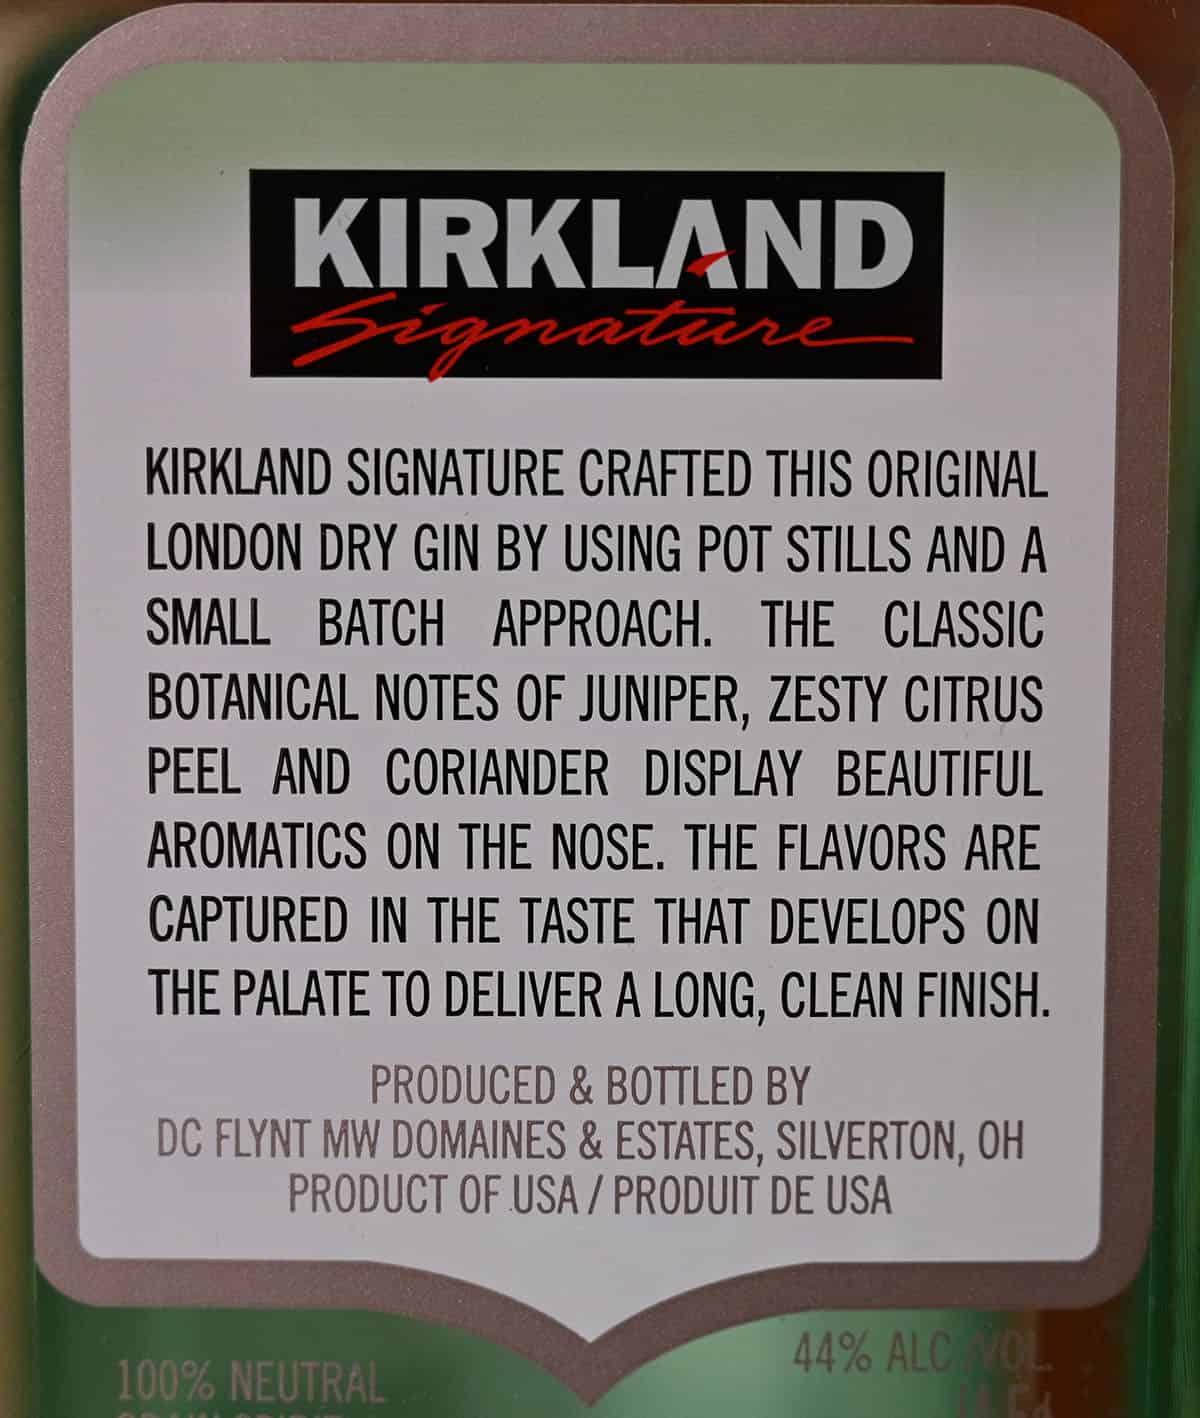 Image of the product description of the gin from the back of the bottle.